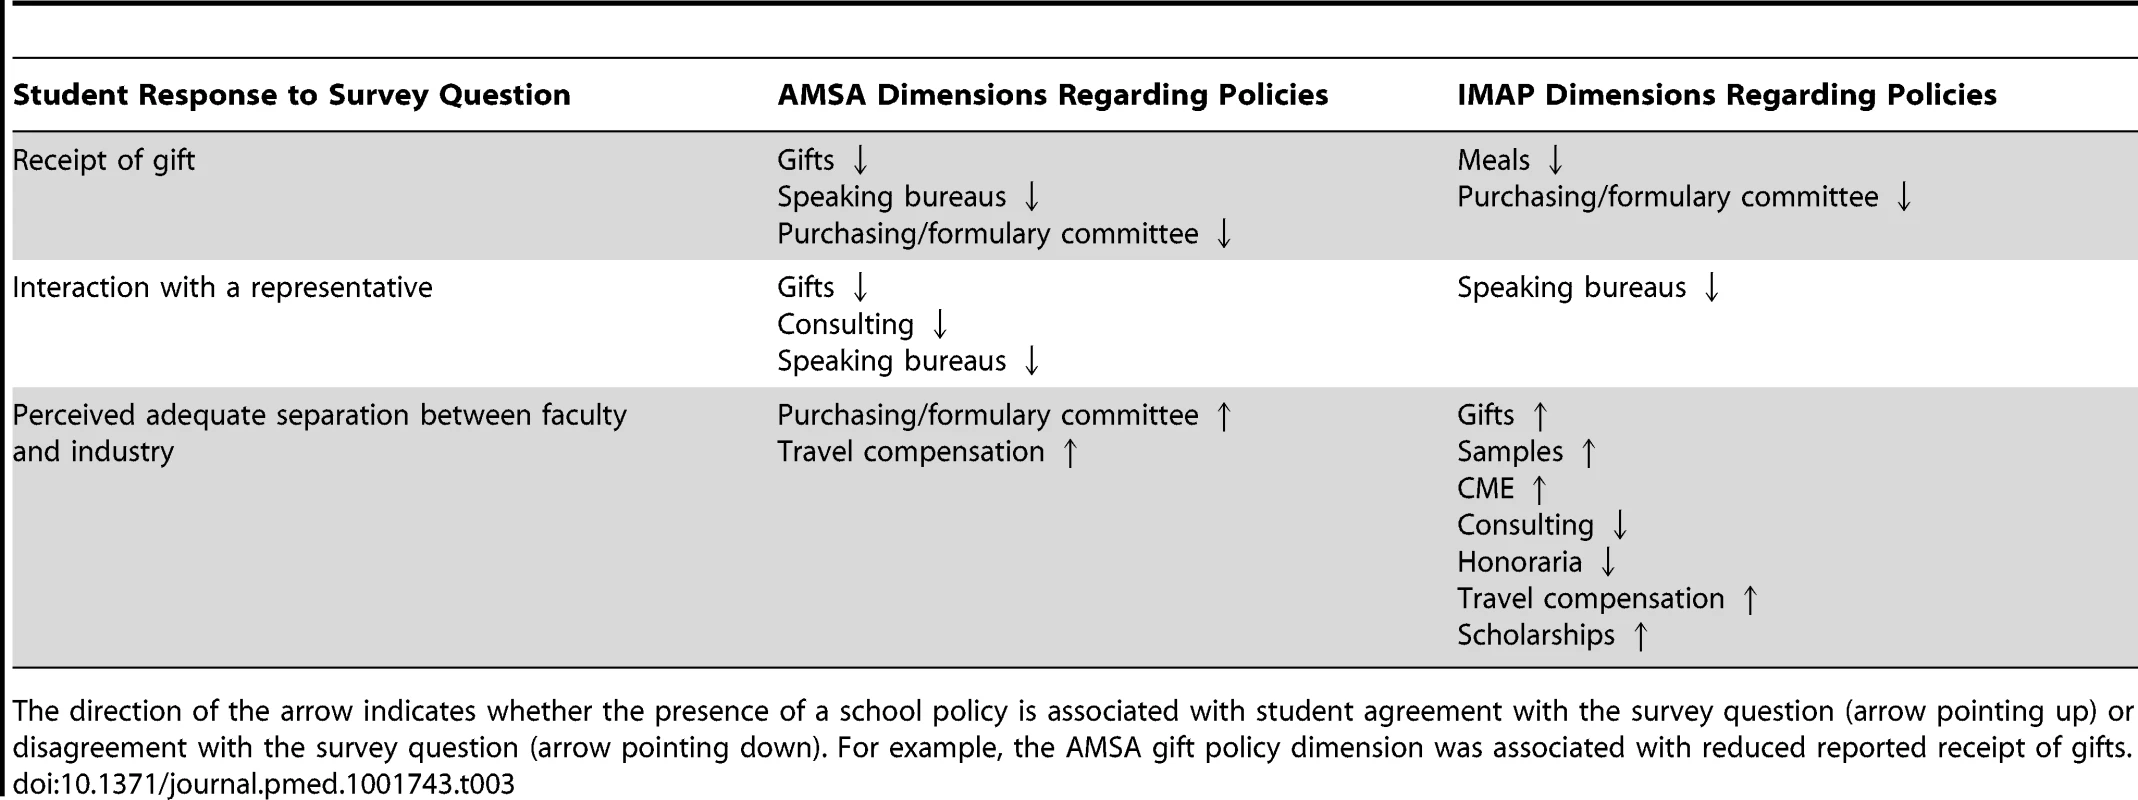 Policy dimensions selected by LASSO as predictors to student responses.